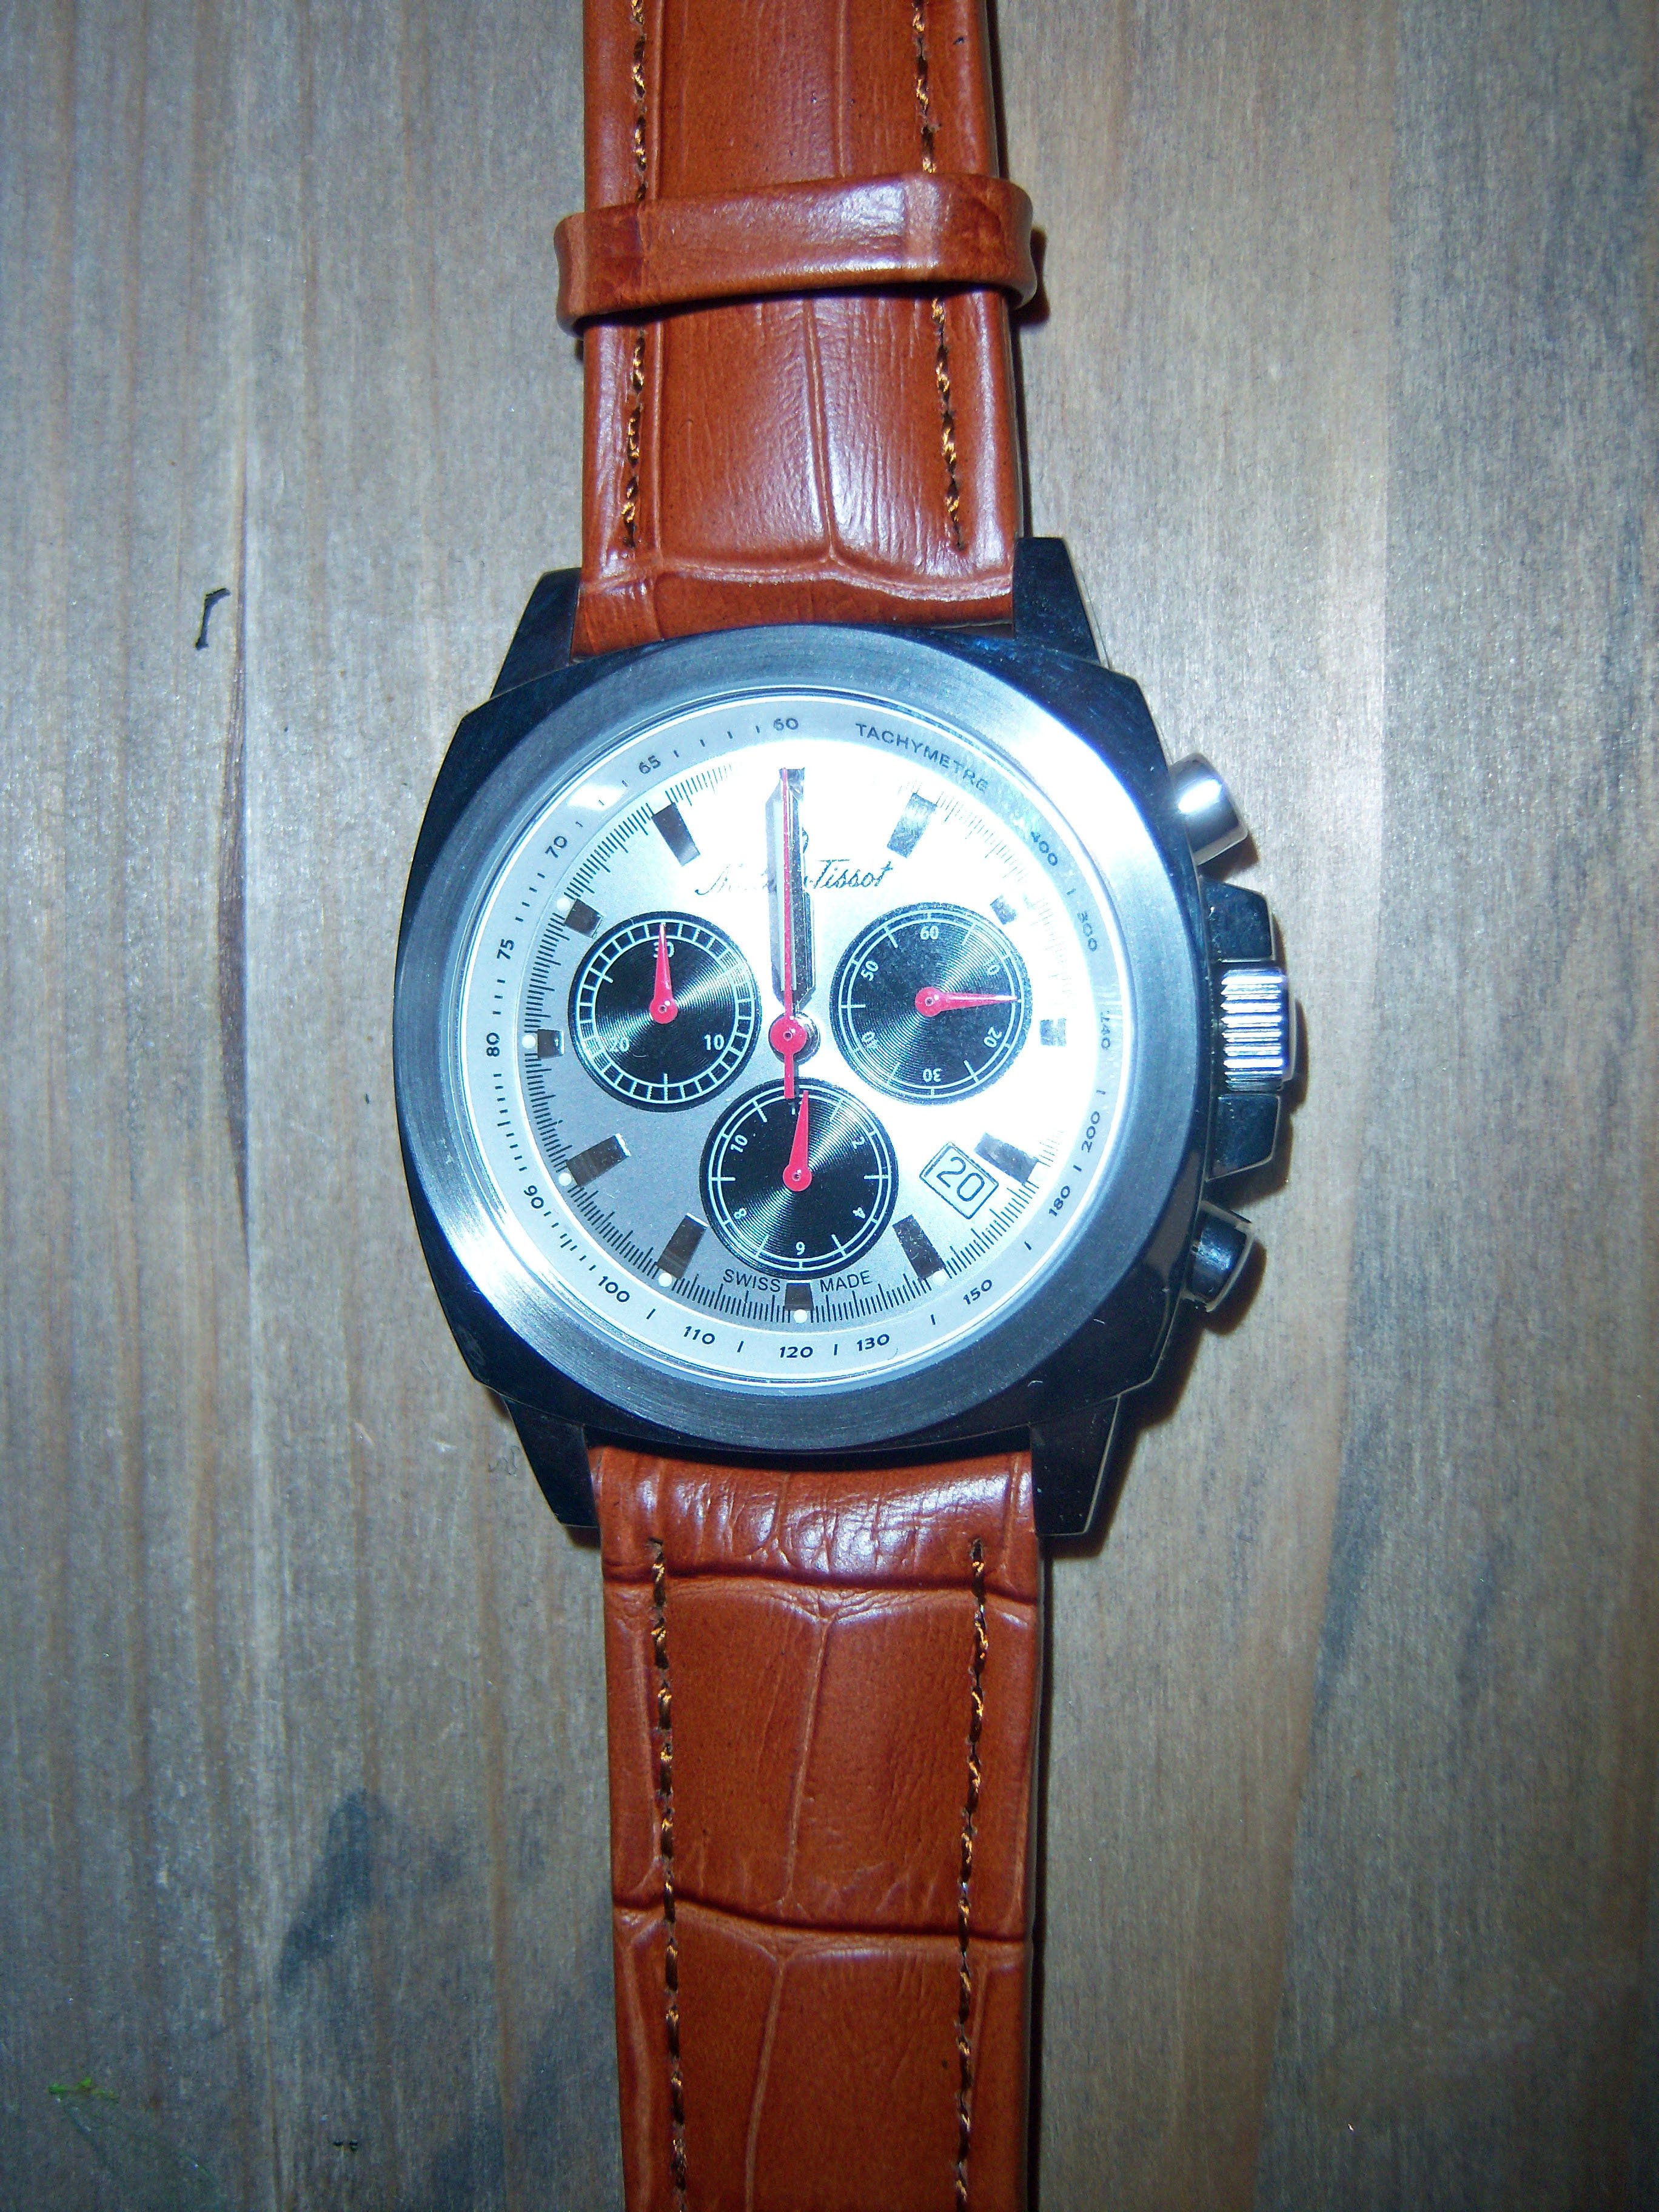 Swiss Made Watches